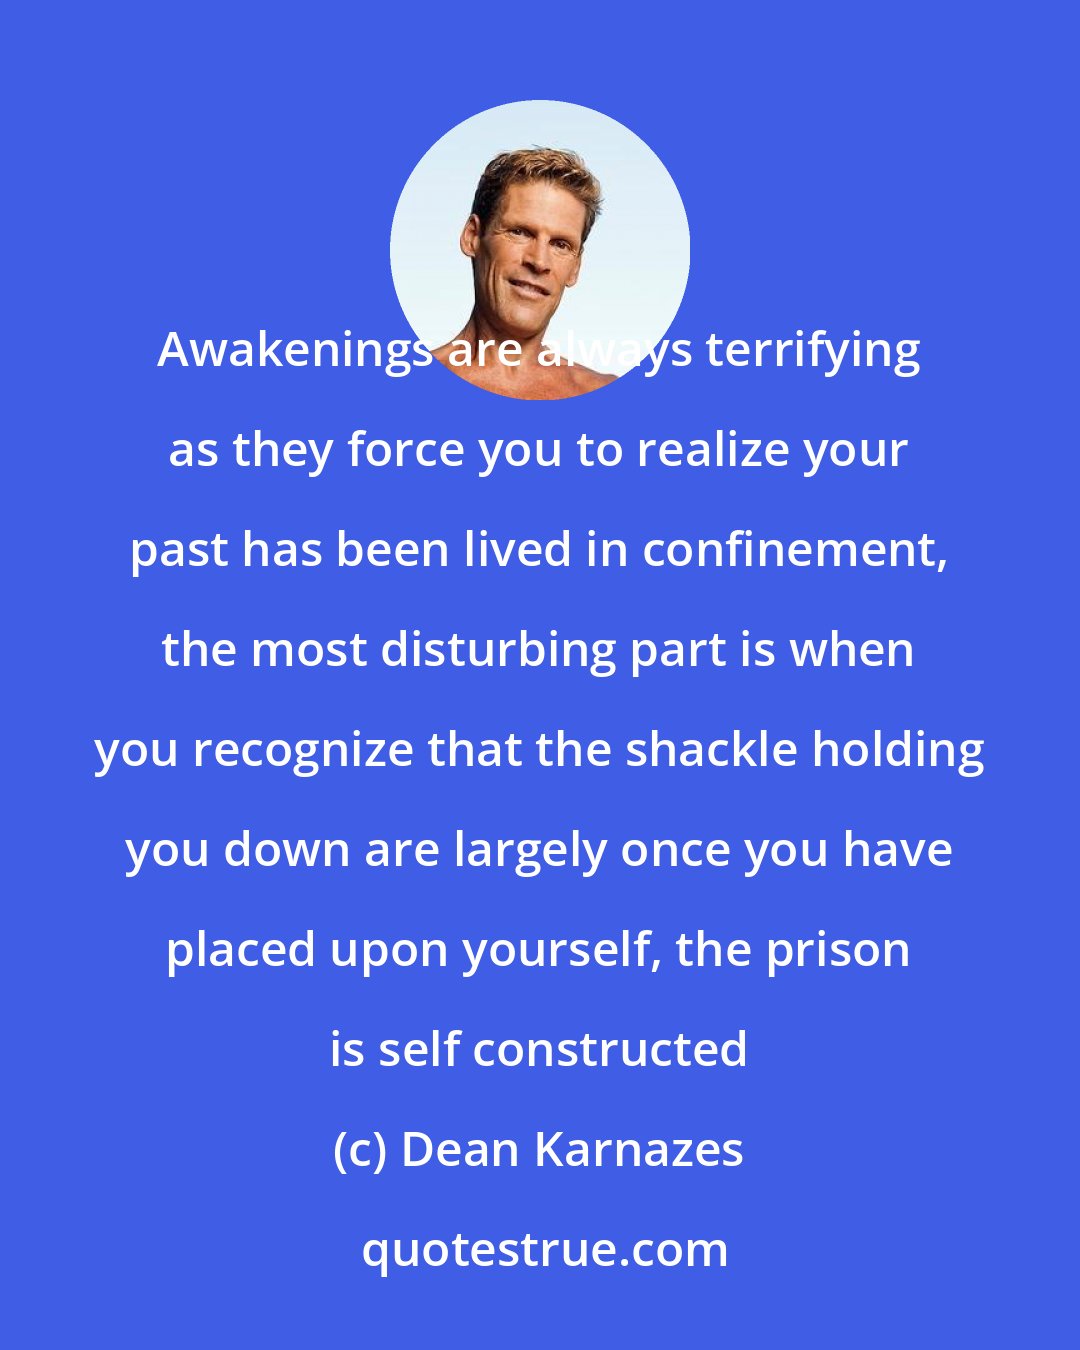 Dean Karnazes: Awakenings are always terrifying as they force you to realize your past has been lived in confinement, the most disturbing part is when you recognize that the shackle holding you down are largely once you have placed upon yourself, the prison is self constructed